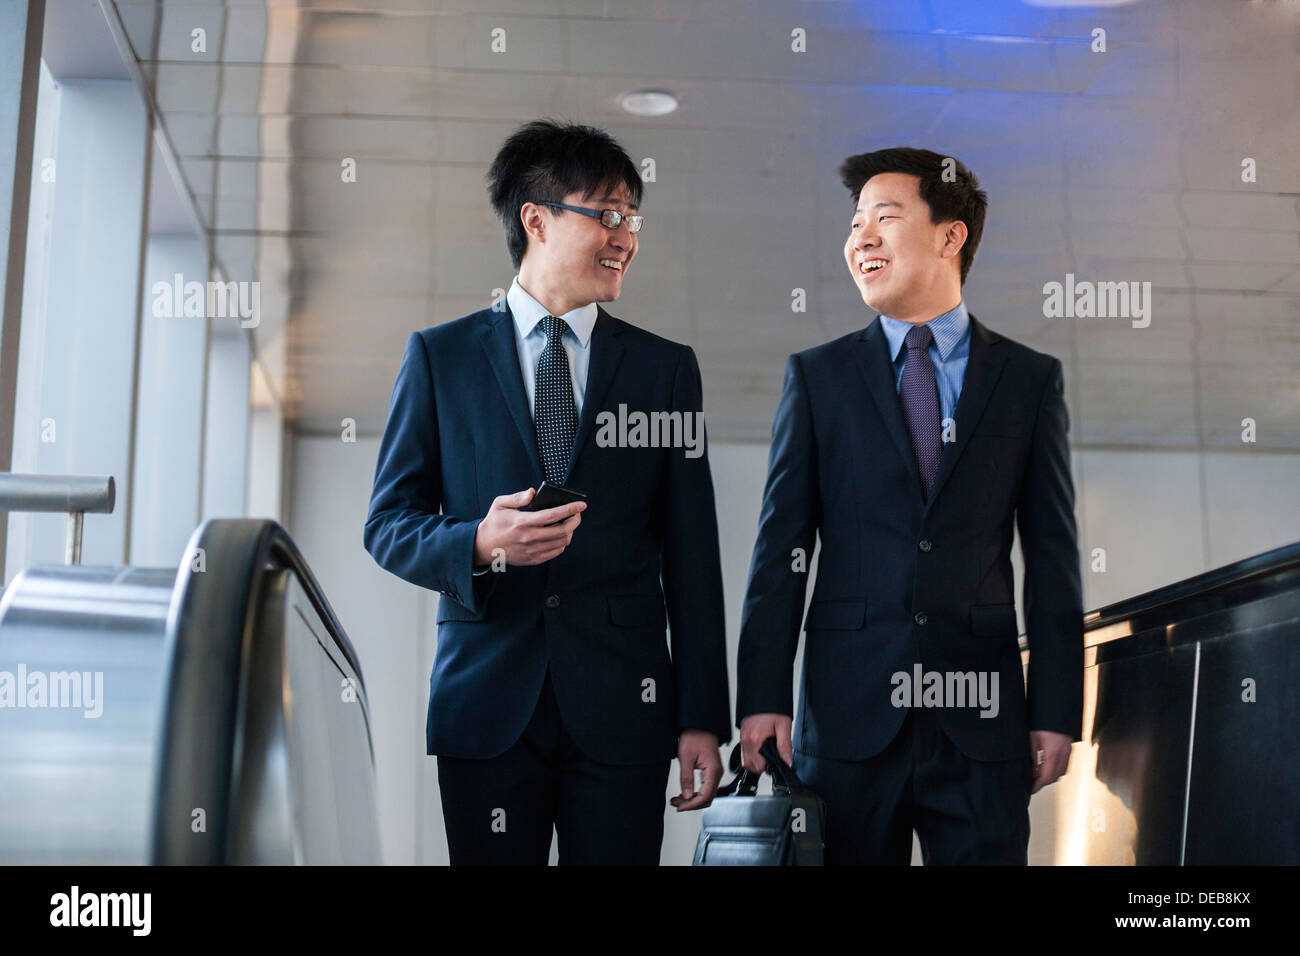 Two smiling businessmen coming up the escalator together Stock Photo